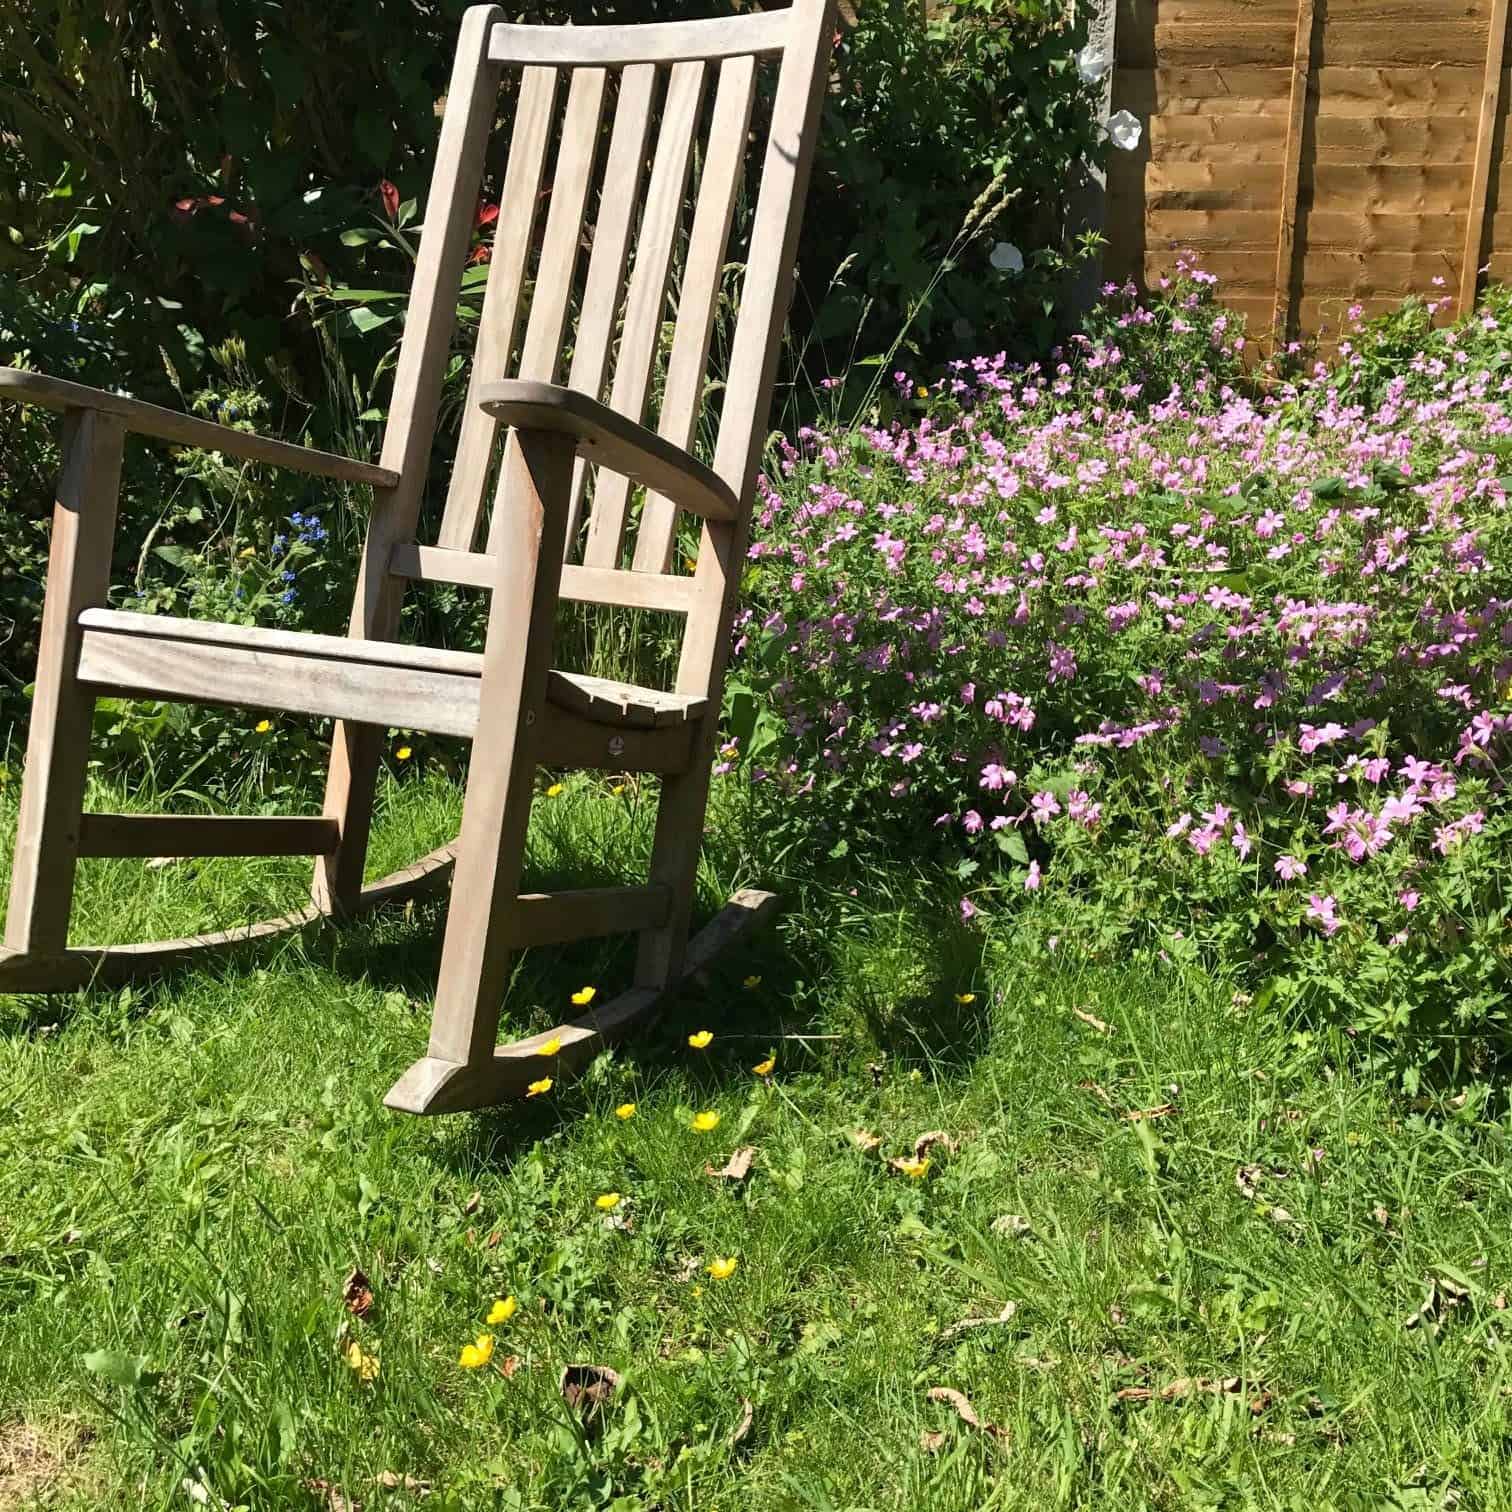 Making the most of Space in a Small Garden